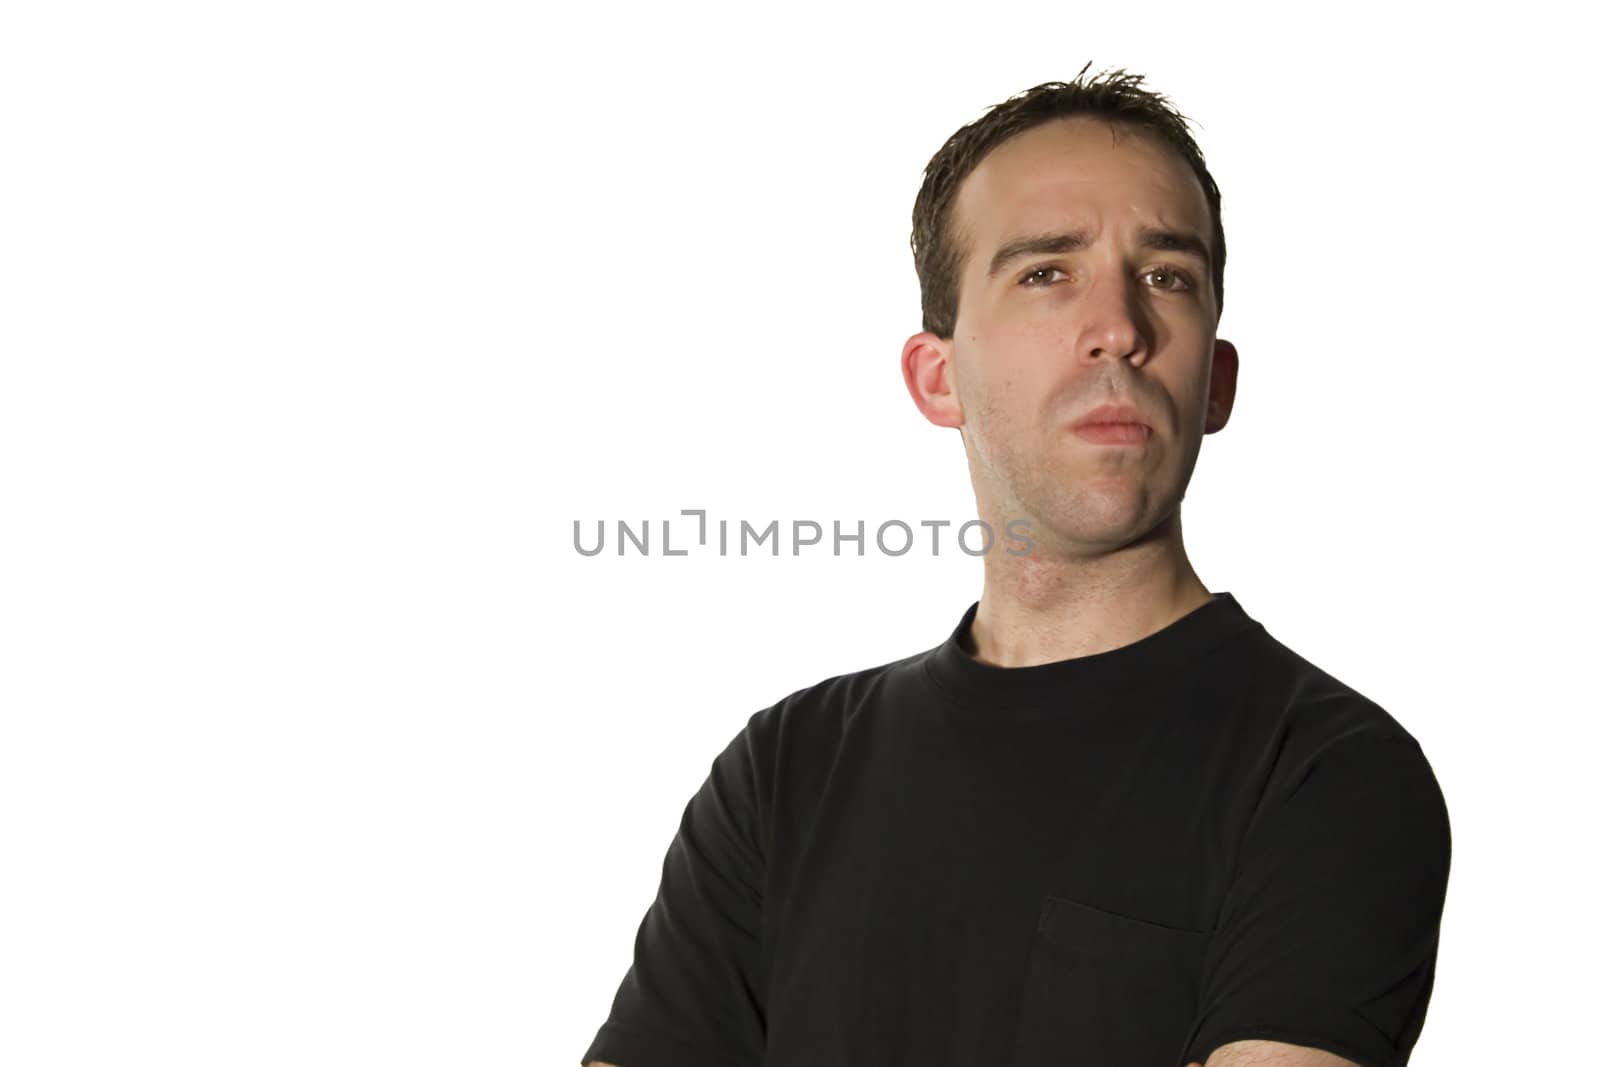 Young man pretending to be cool, wearing a black t-shirt